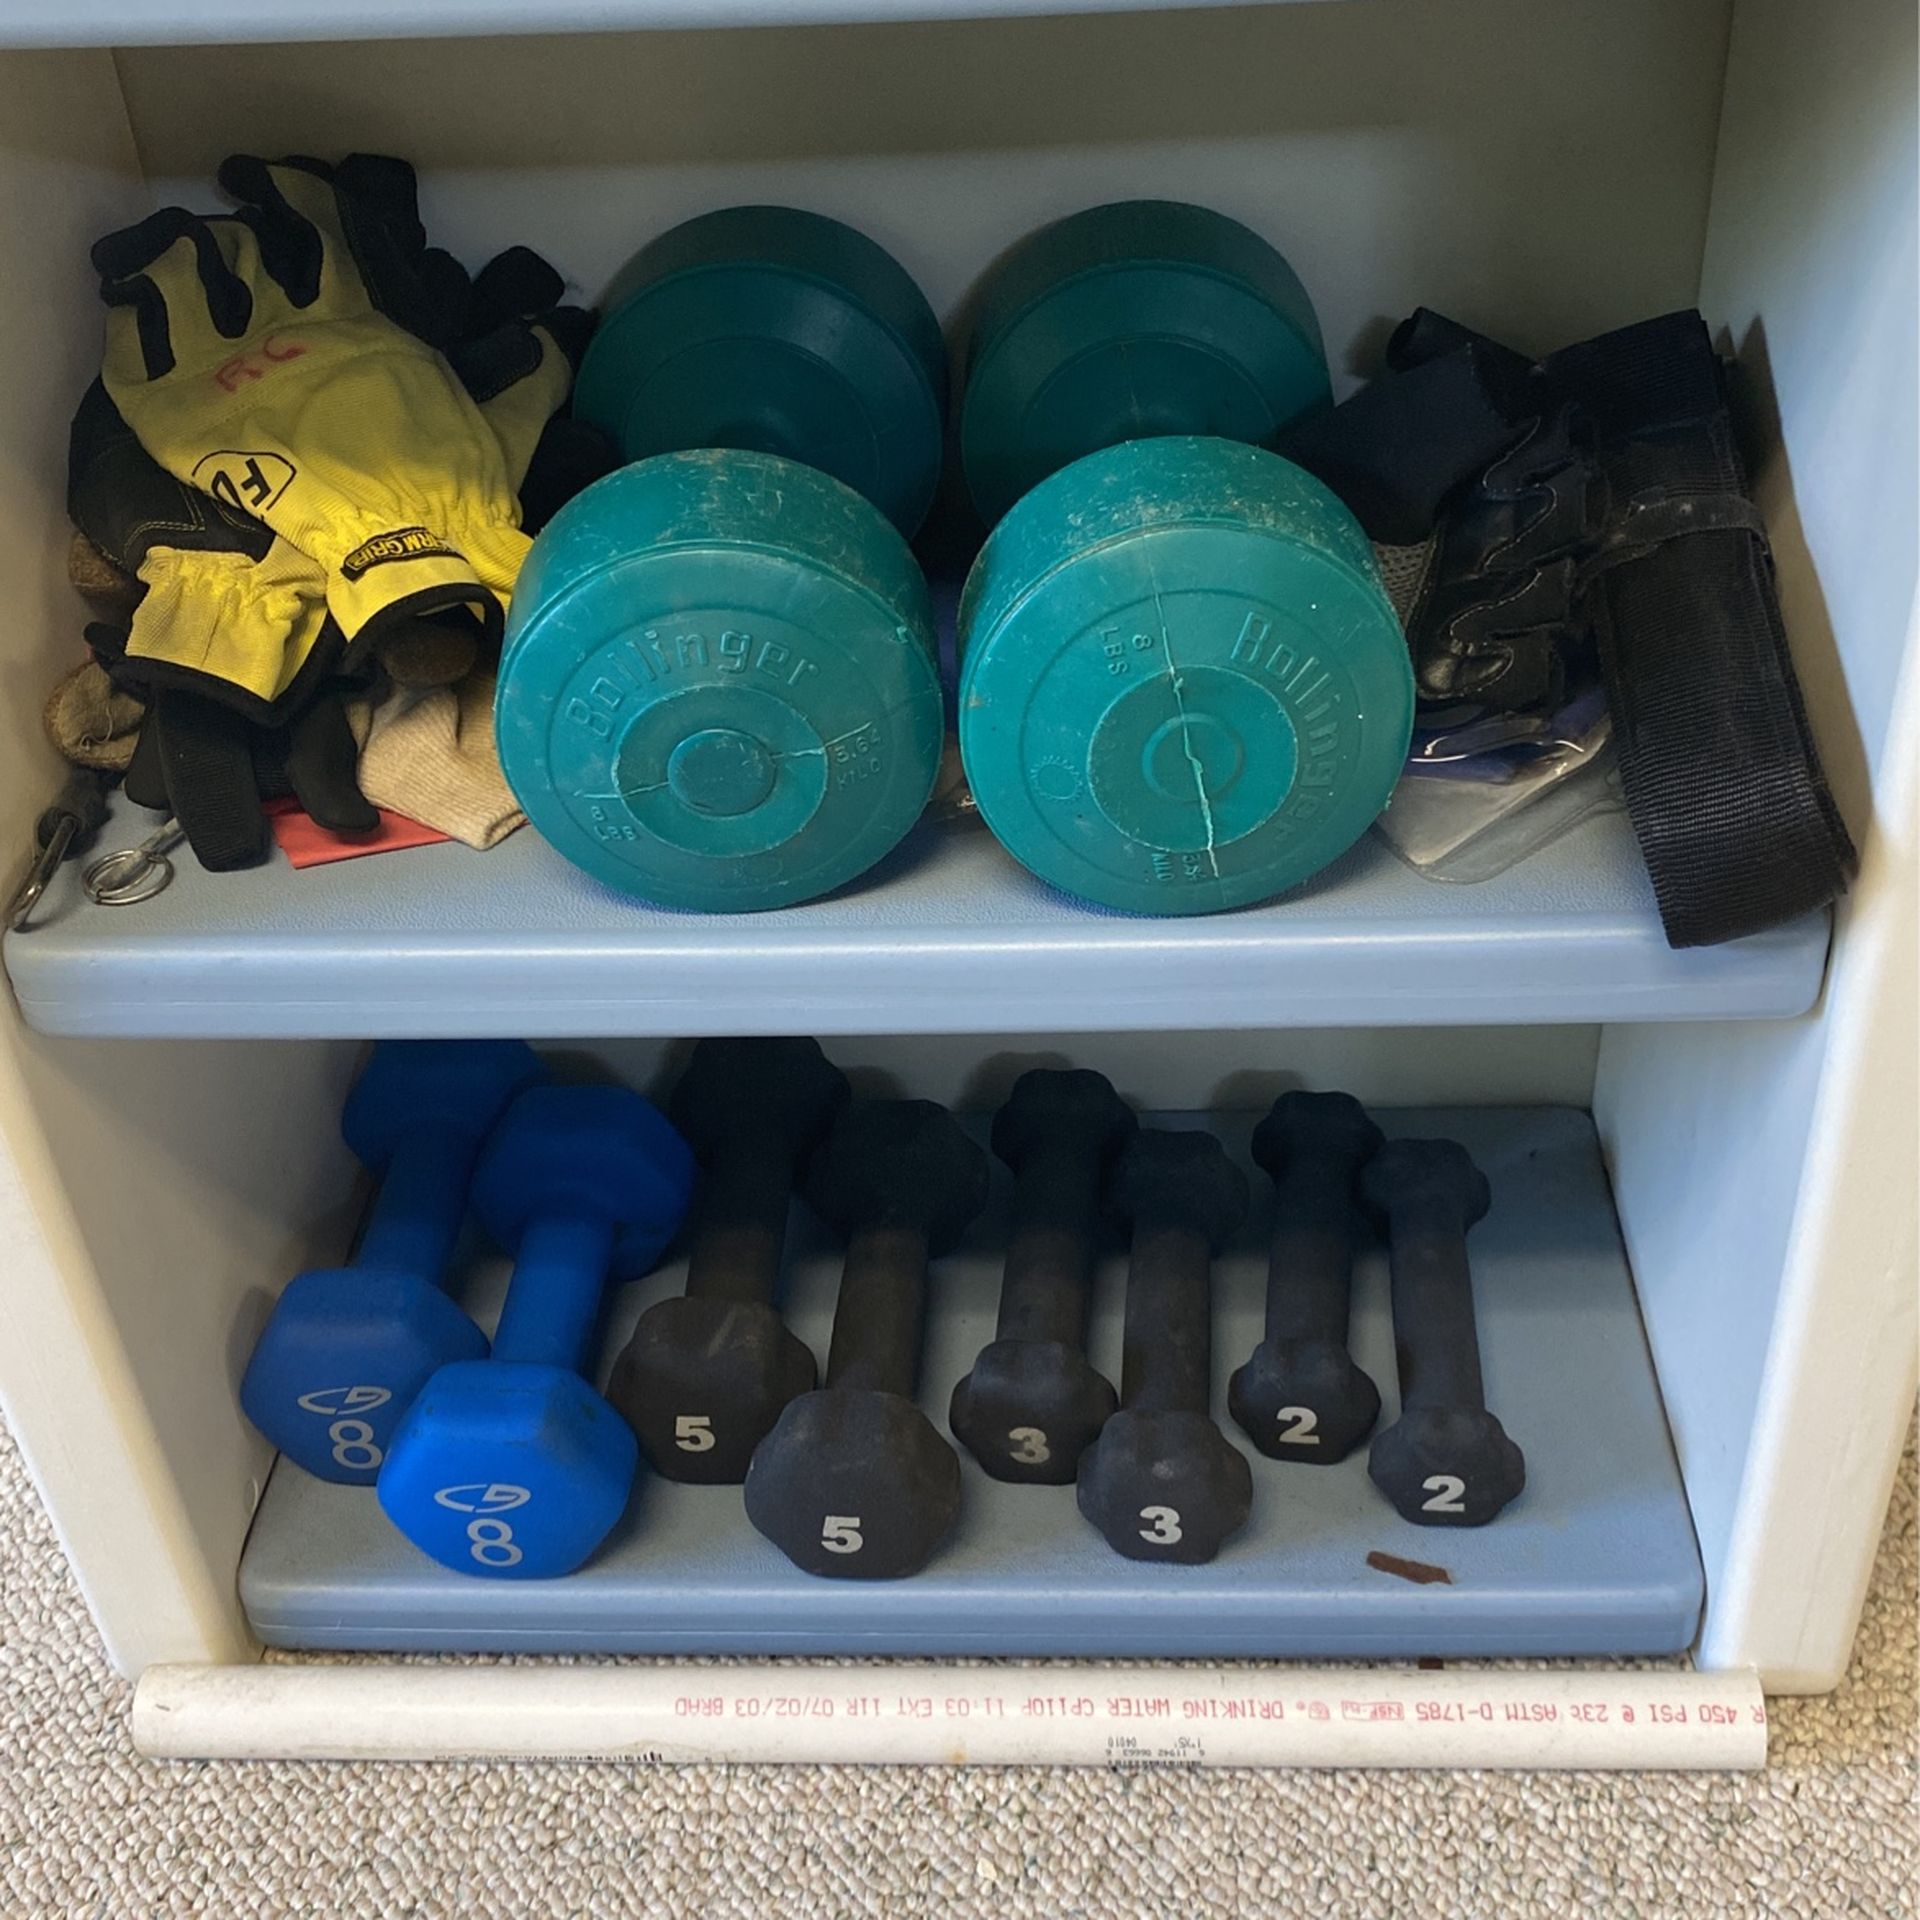 Dumbbells, Assorted Sizes From 2 Pounds To eight pounds sold by the set at a dollar a pound